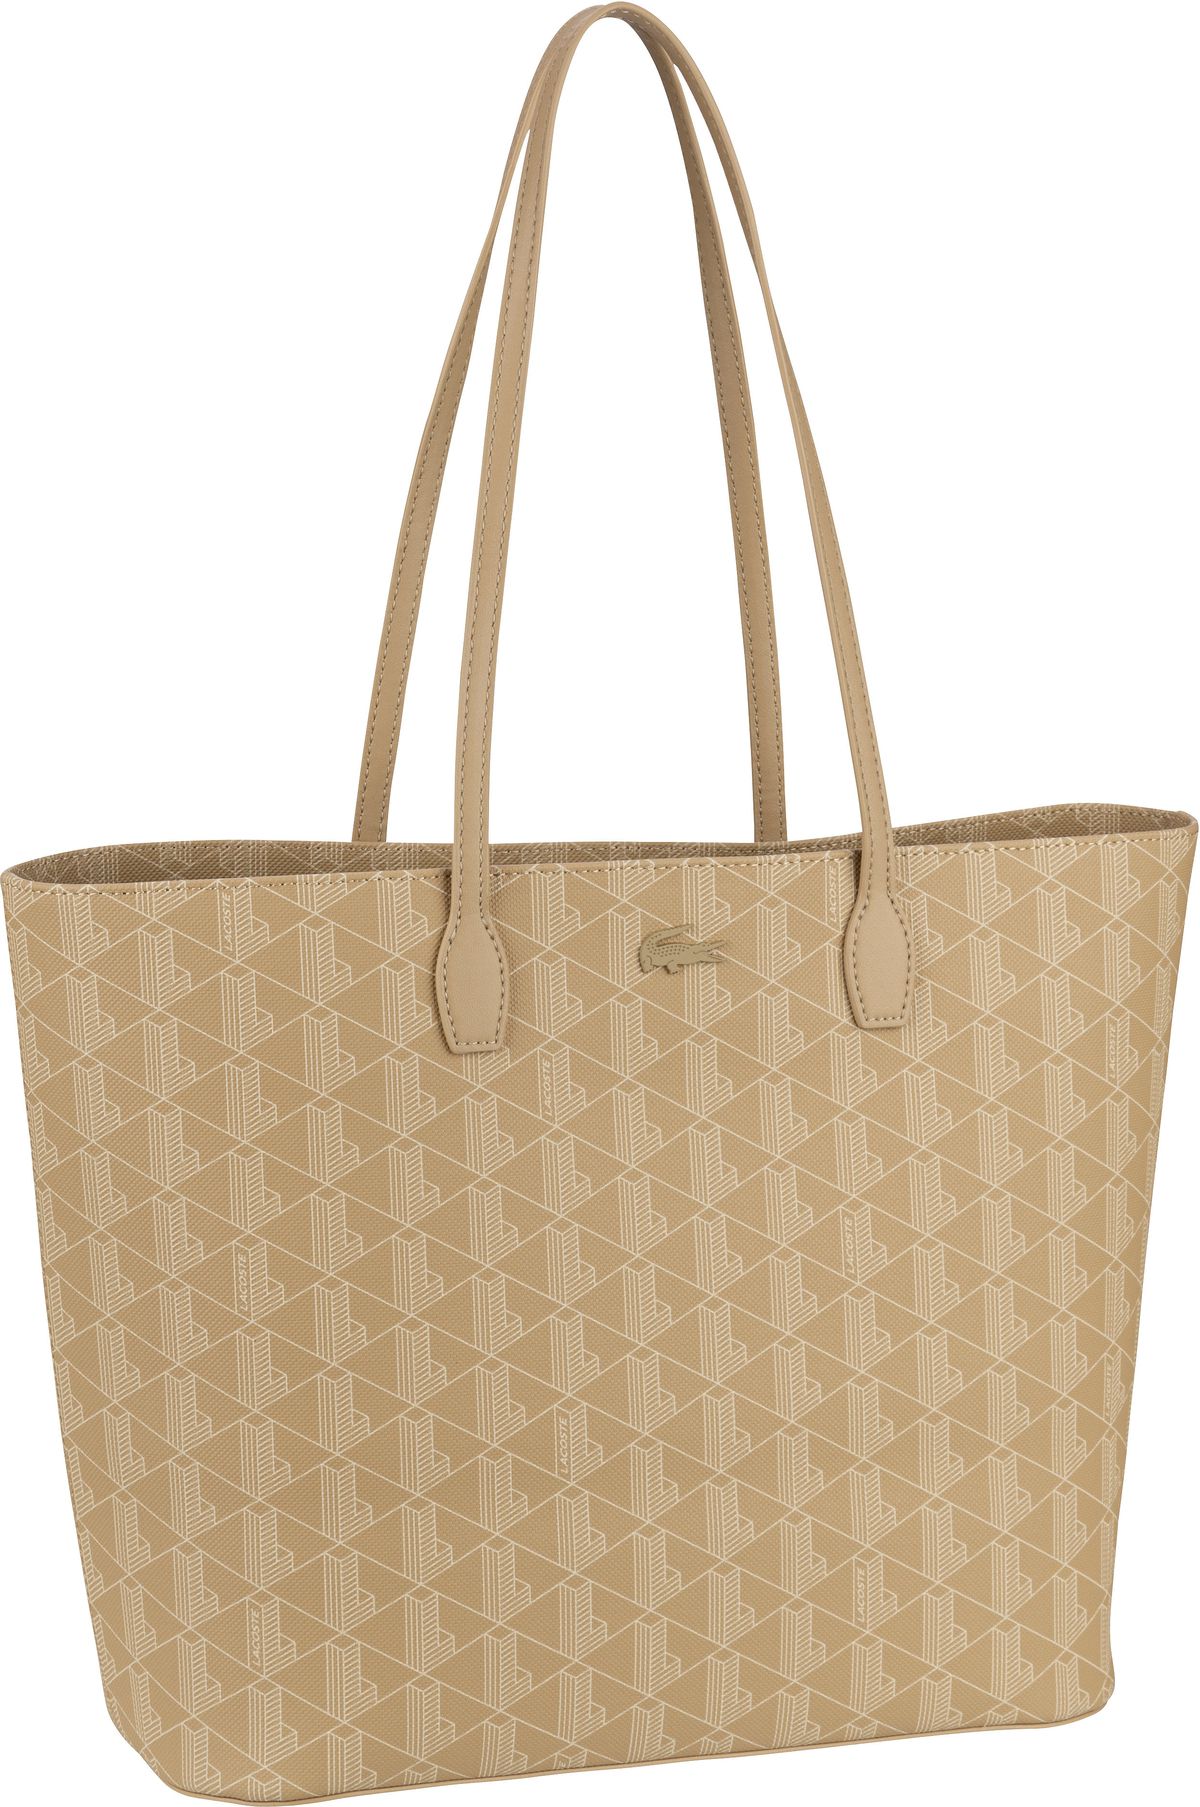 Lacoste Daily Lifestyle Shopping Bag 4208 - Viennois/Beige